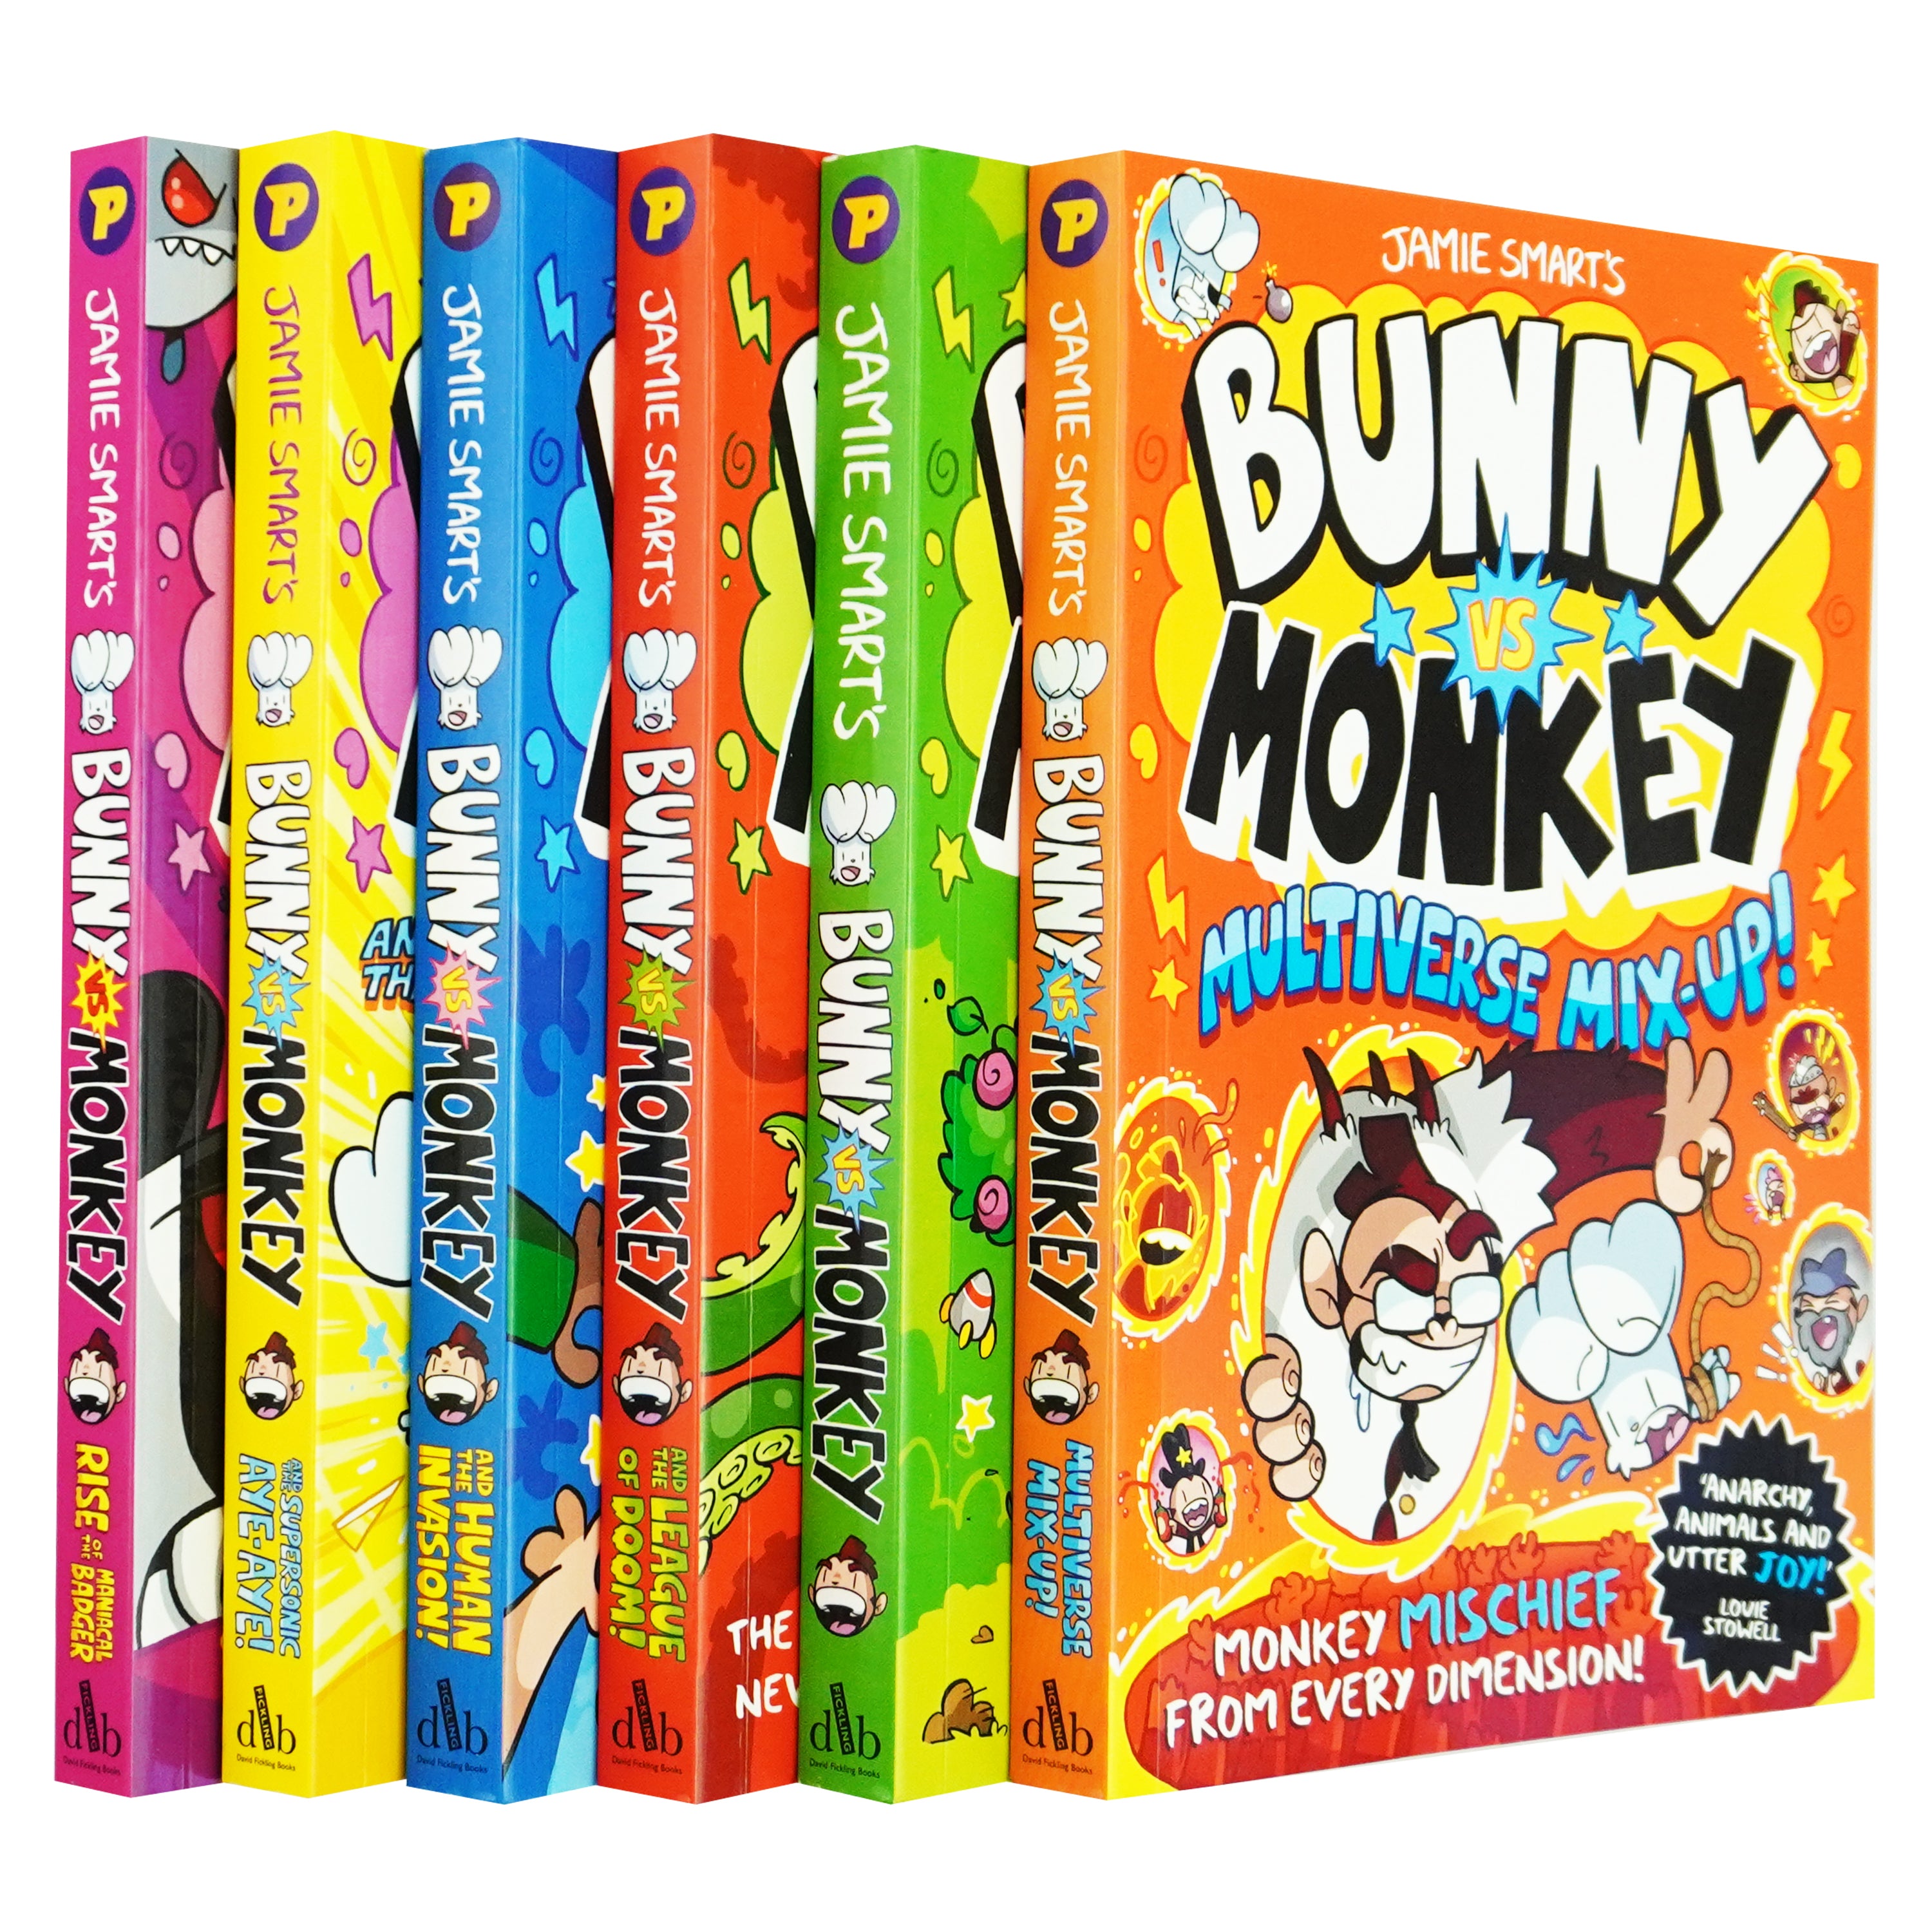 Bunny vs Monkey By Jamie Smart 6 Books Collection Set - Ages 7-9 - Paperback